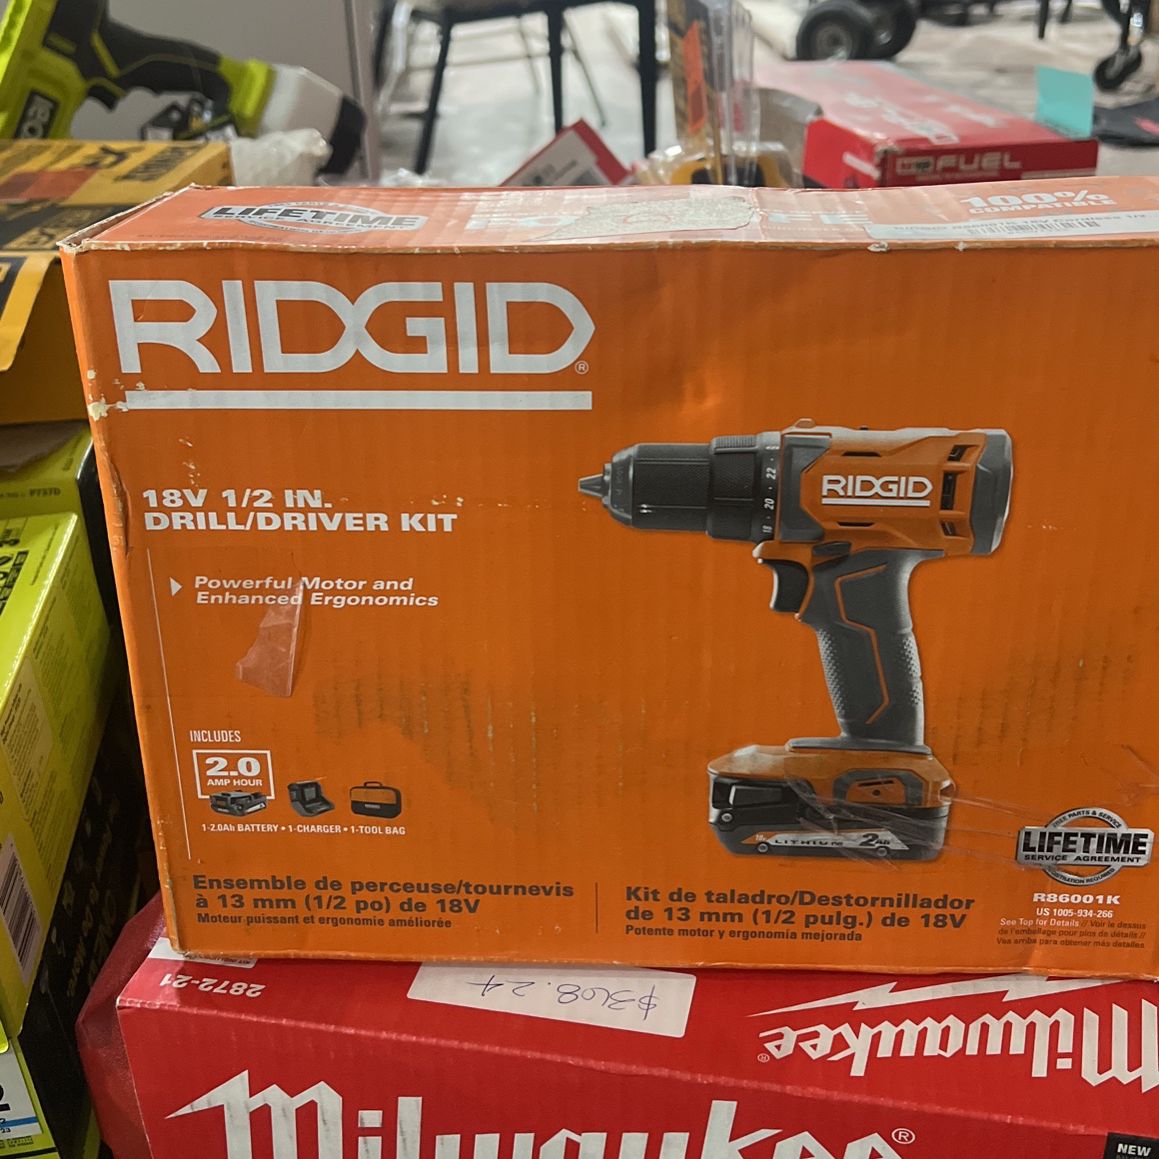 RIDGID 18V Cordless 1/2 in. Drill/Driver Kit with (1) 2.0 Ah Battery and Charger